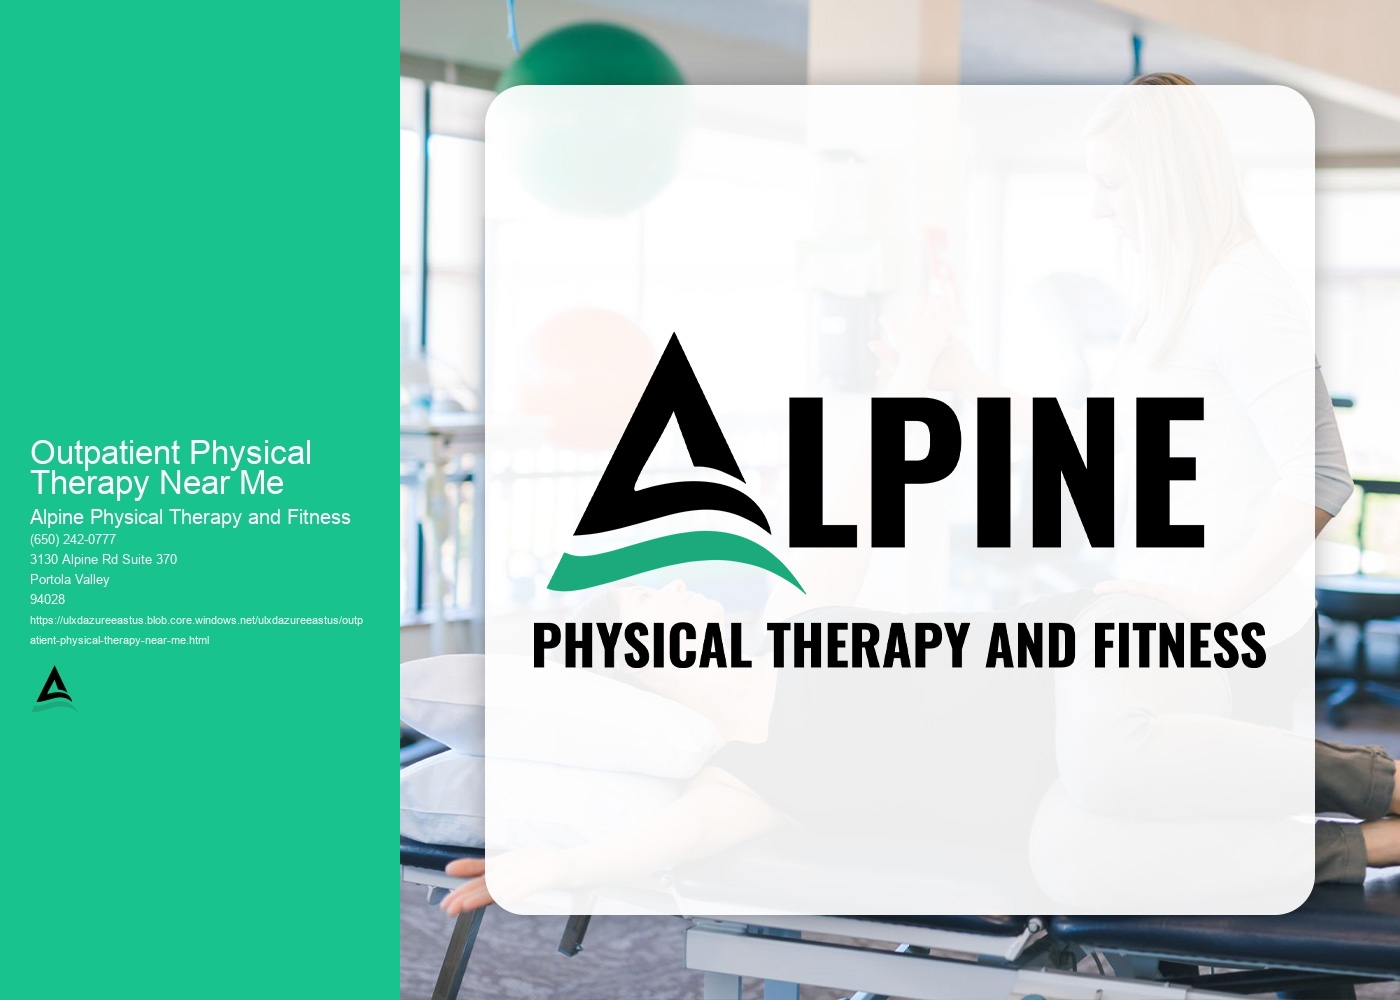 What specialized outpatient physical therapy programs are available for individuals with neurological conditions such as stroke or Parkinson's disease?